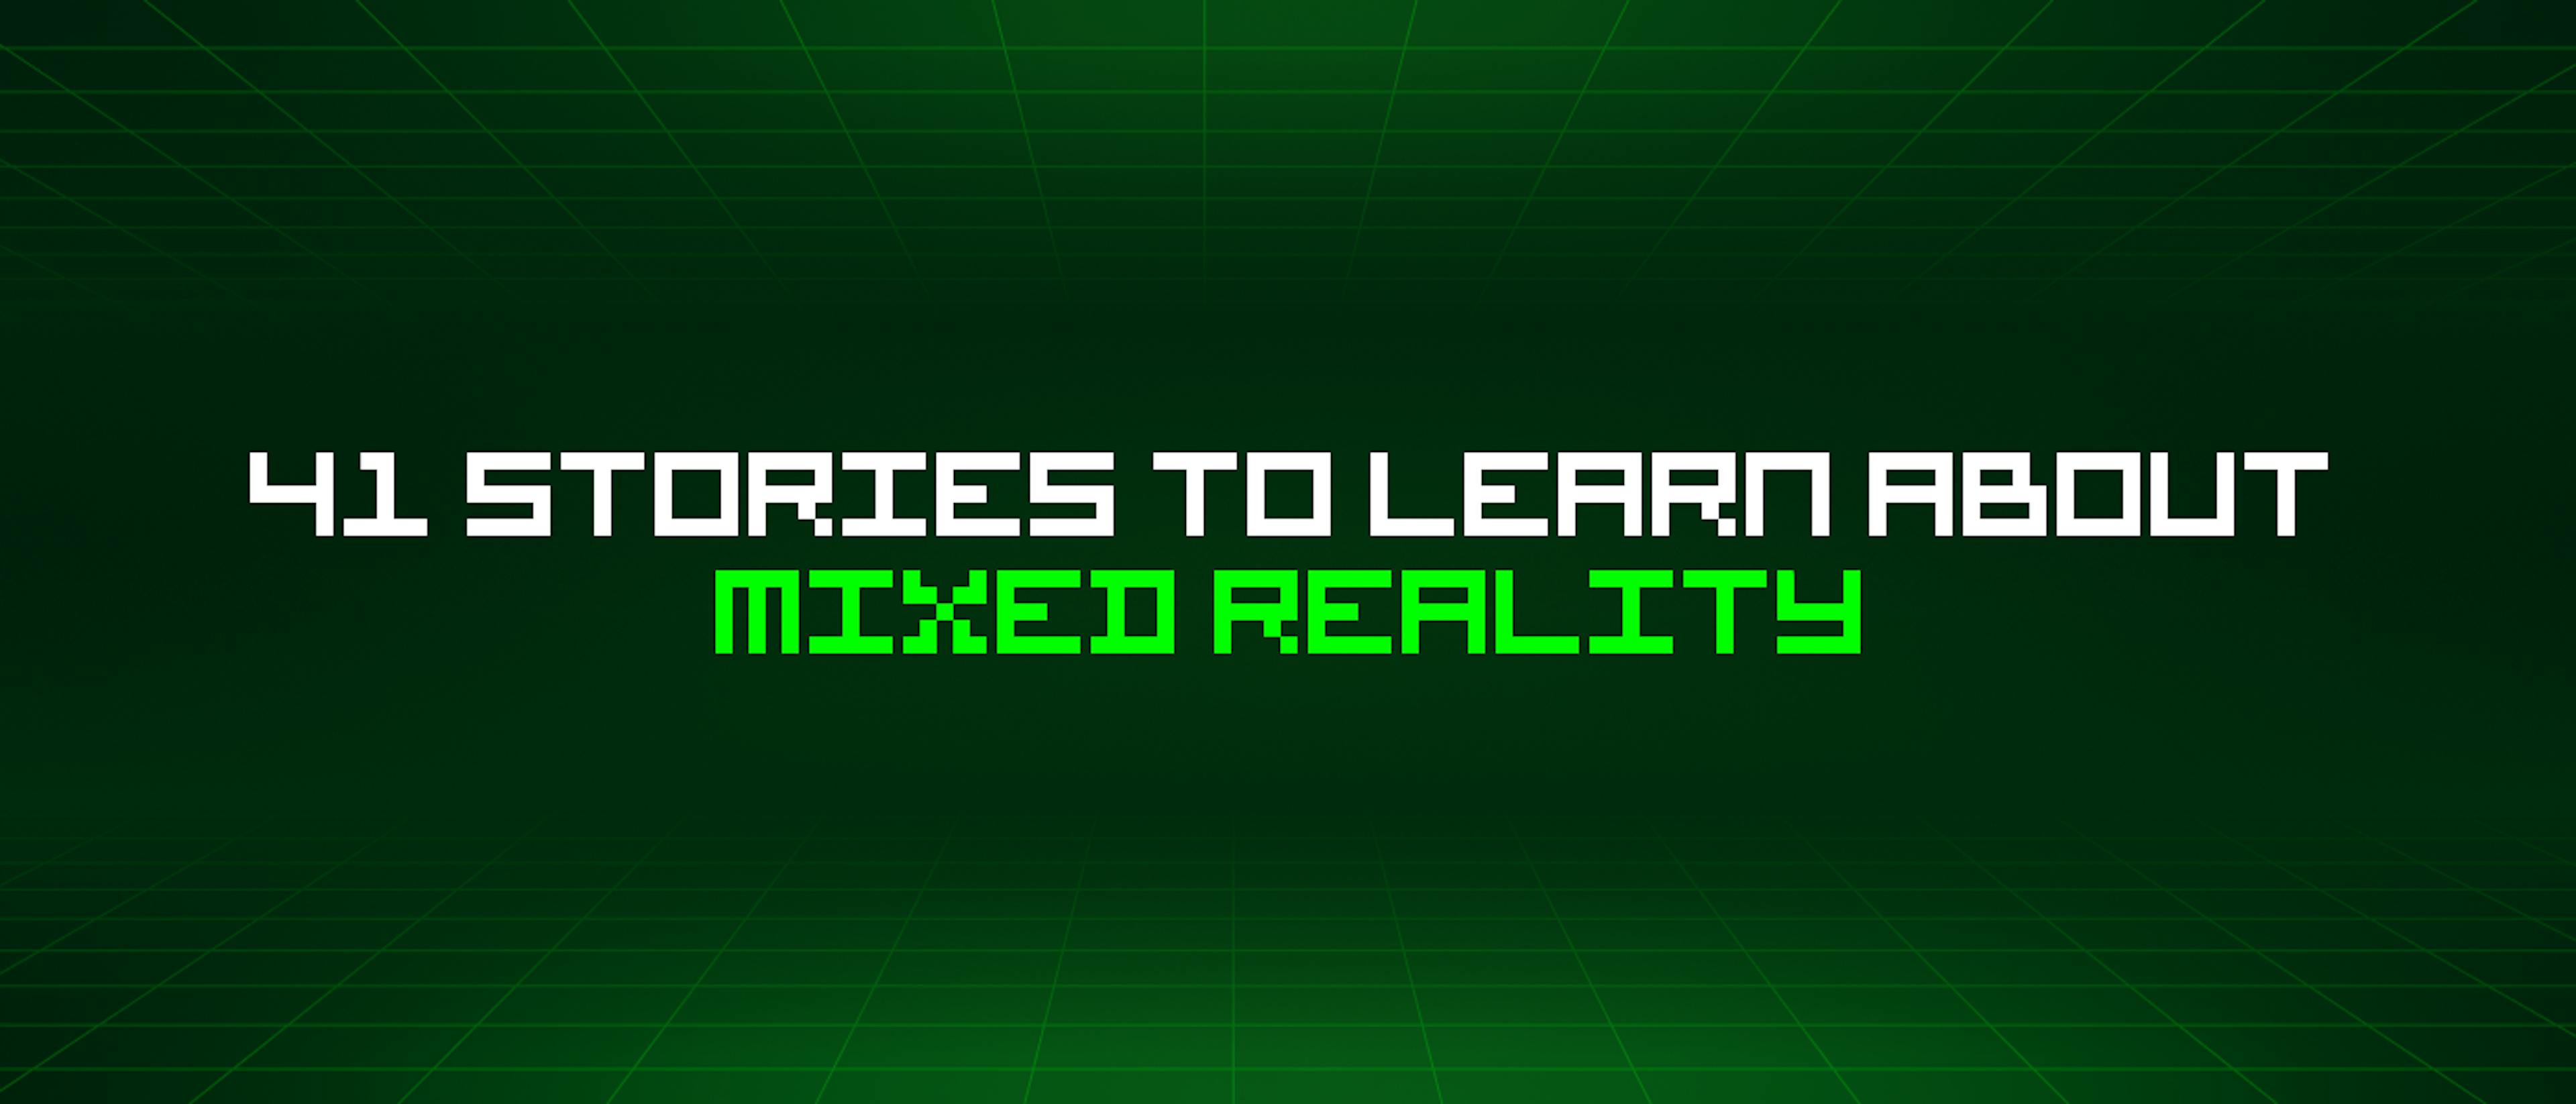 featured image - 41 Stories To Learn About Mixed Reality